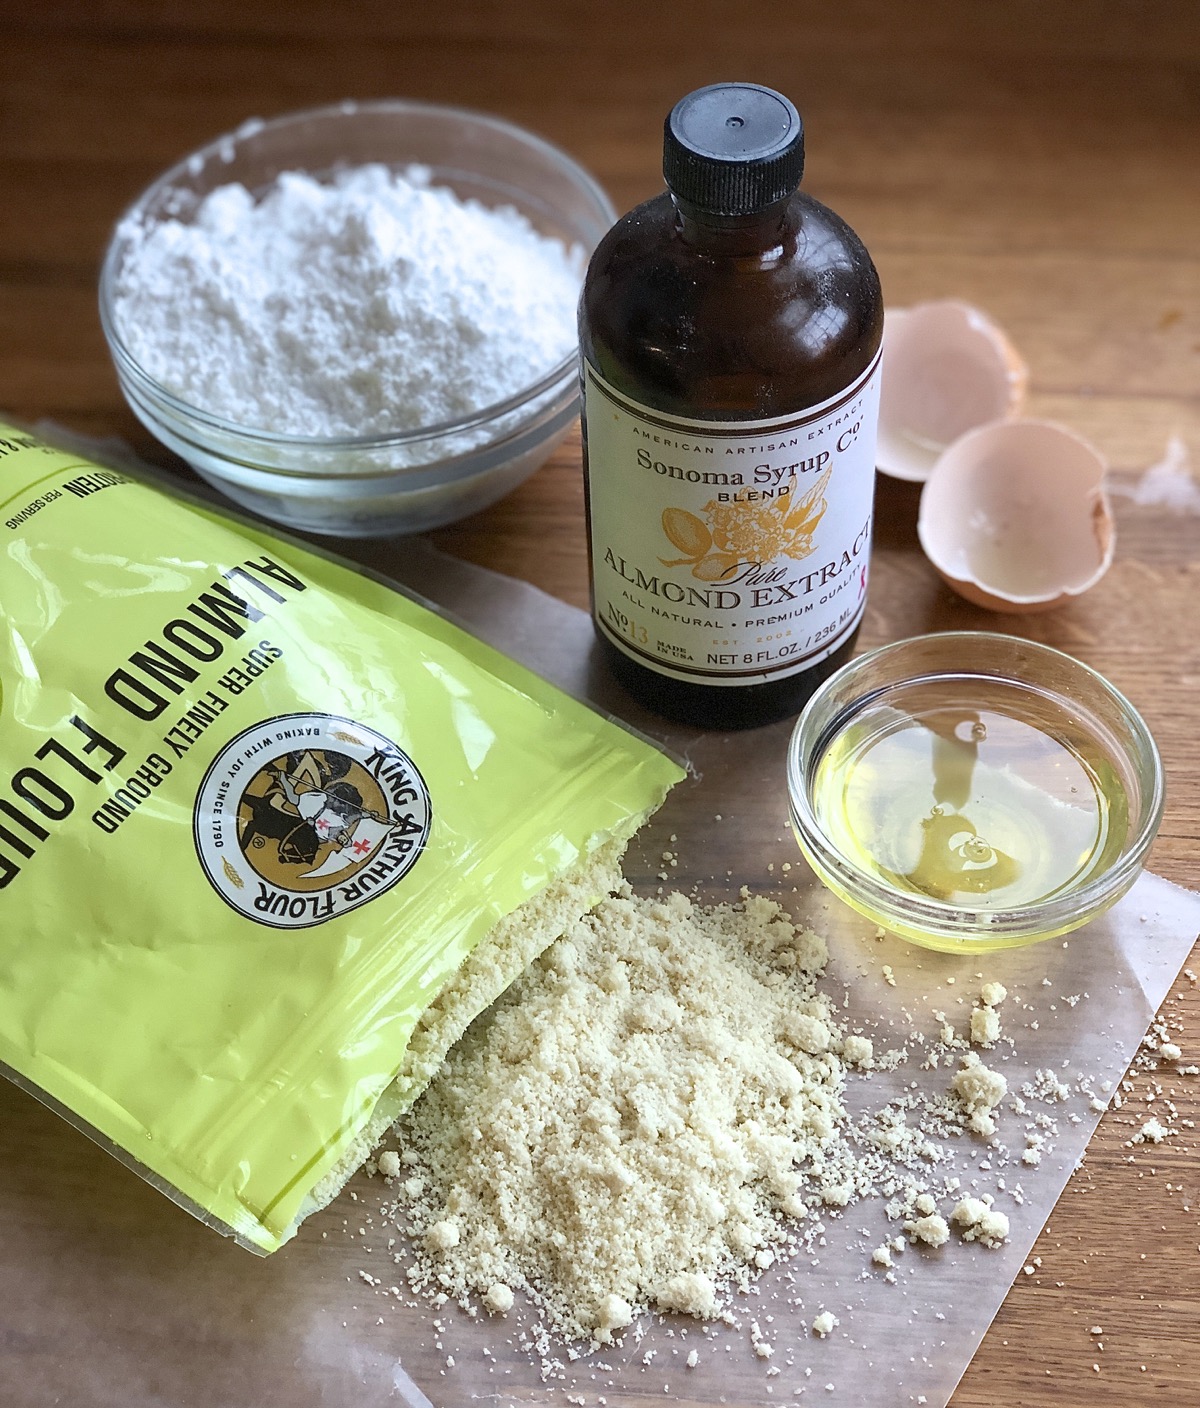 Ingredients for homemade almond paste: almond flour, confectioners' sugar, egg white, and almond extract.